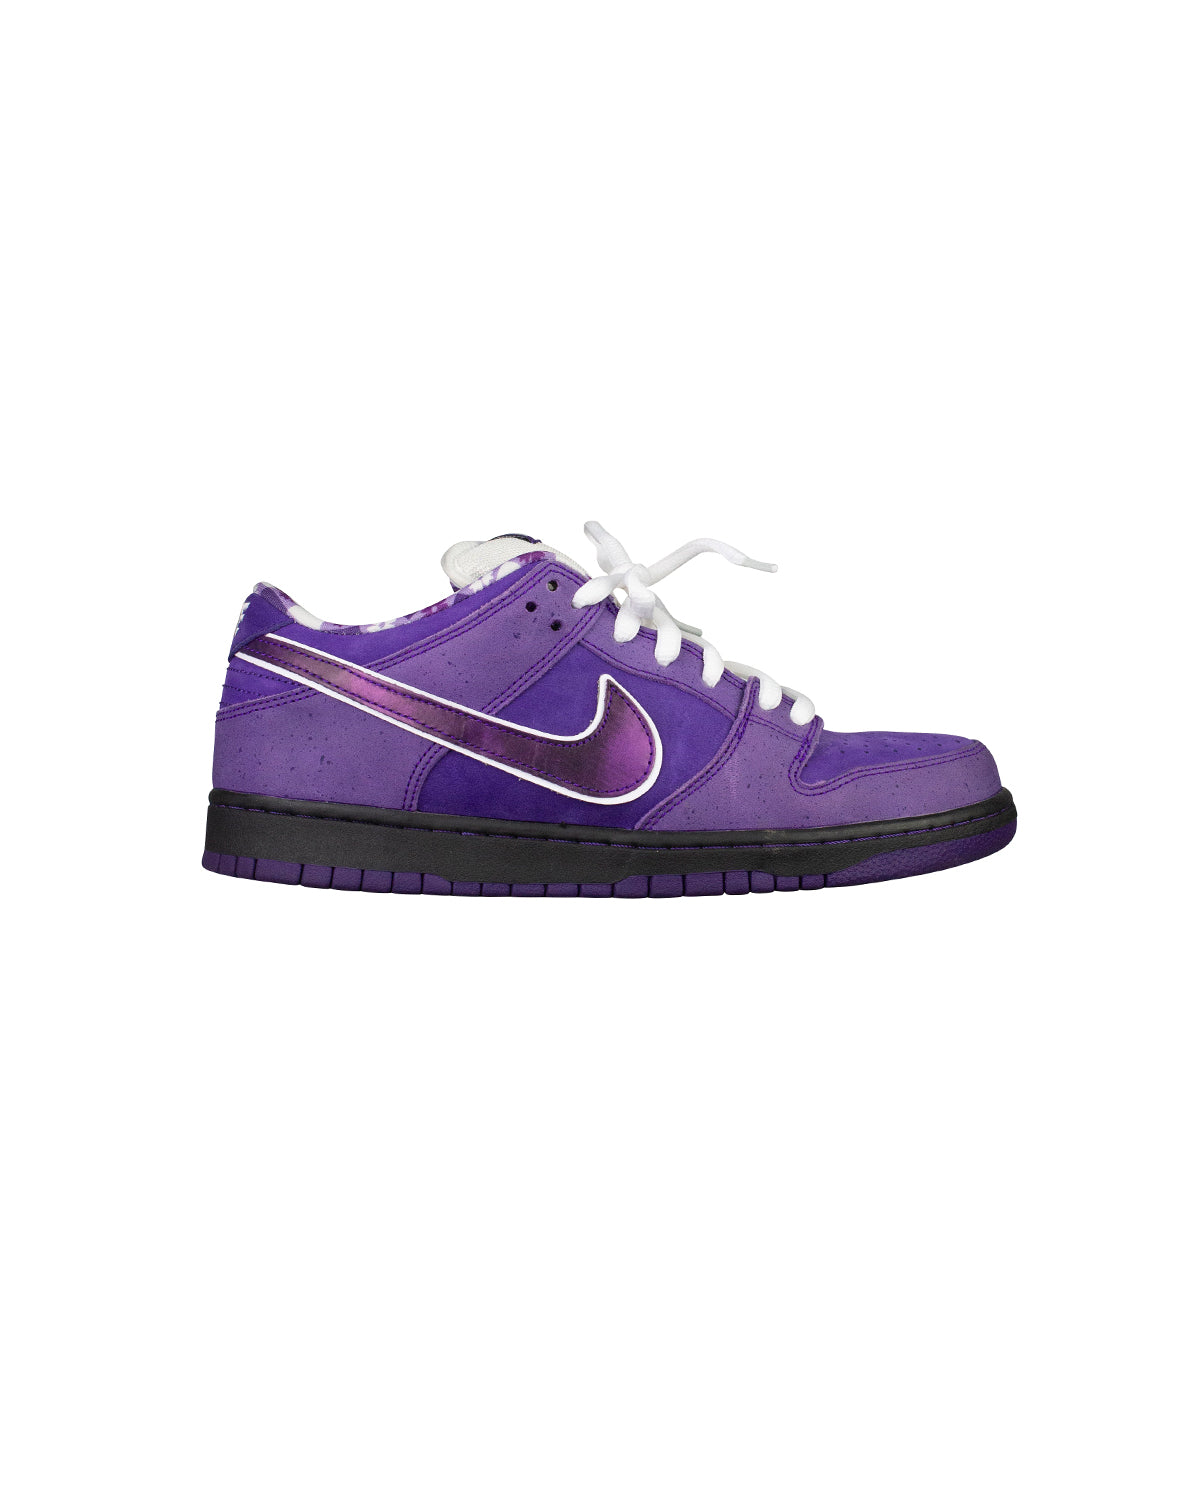 Nike Pro Sb x Concepts Purple Lobster Size 10 Right 